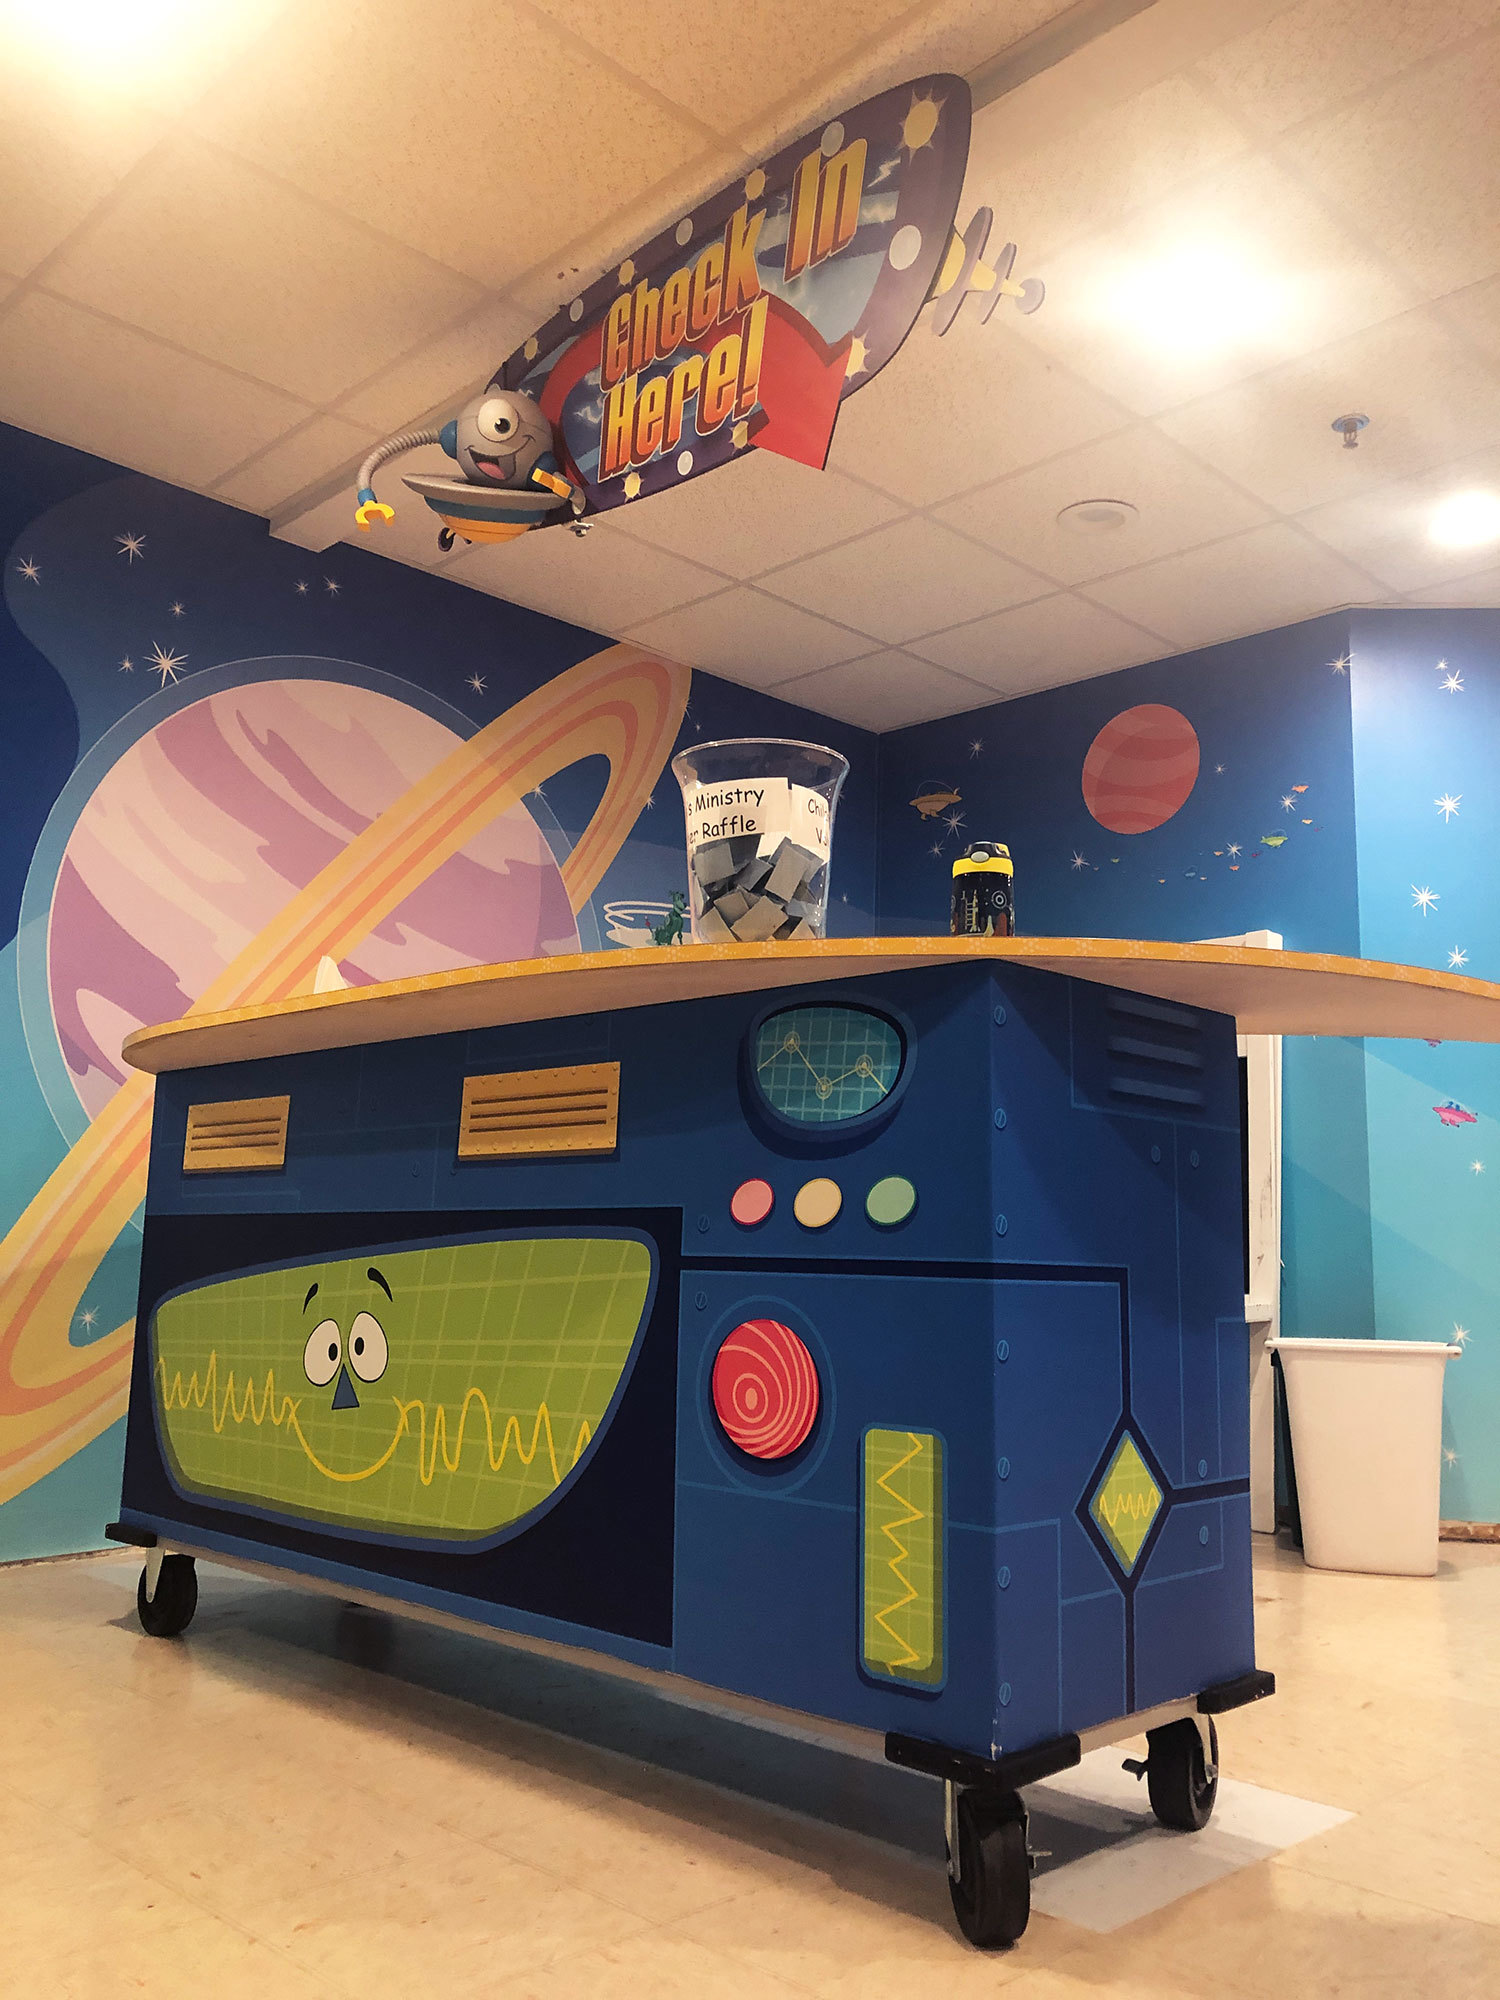 Future World Space Themed Wall Covering and a check in desk wrap featuring wacky graph displays at London Bridge Baptist Church